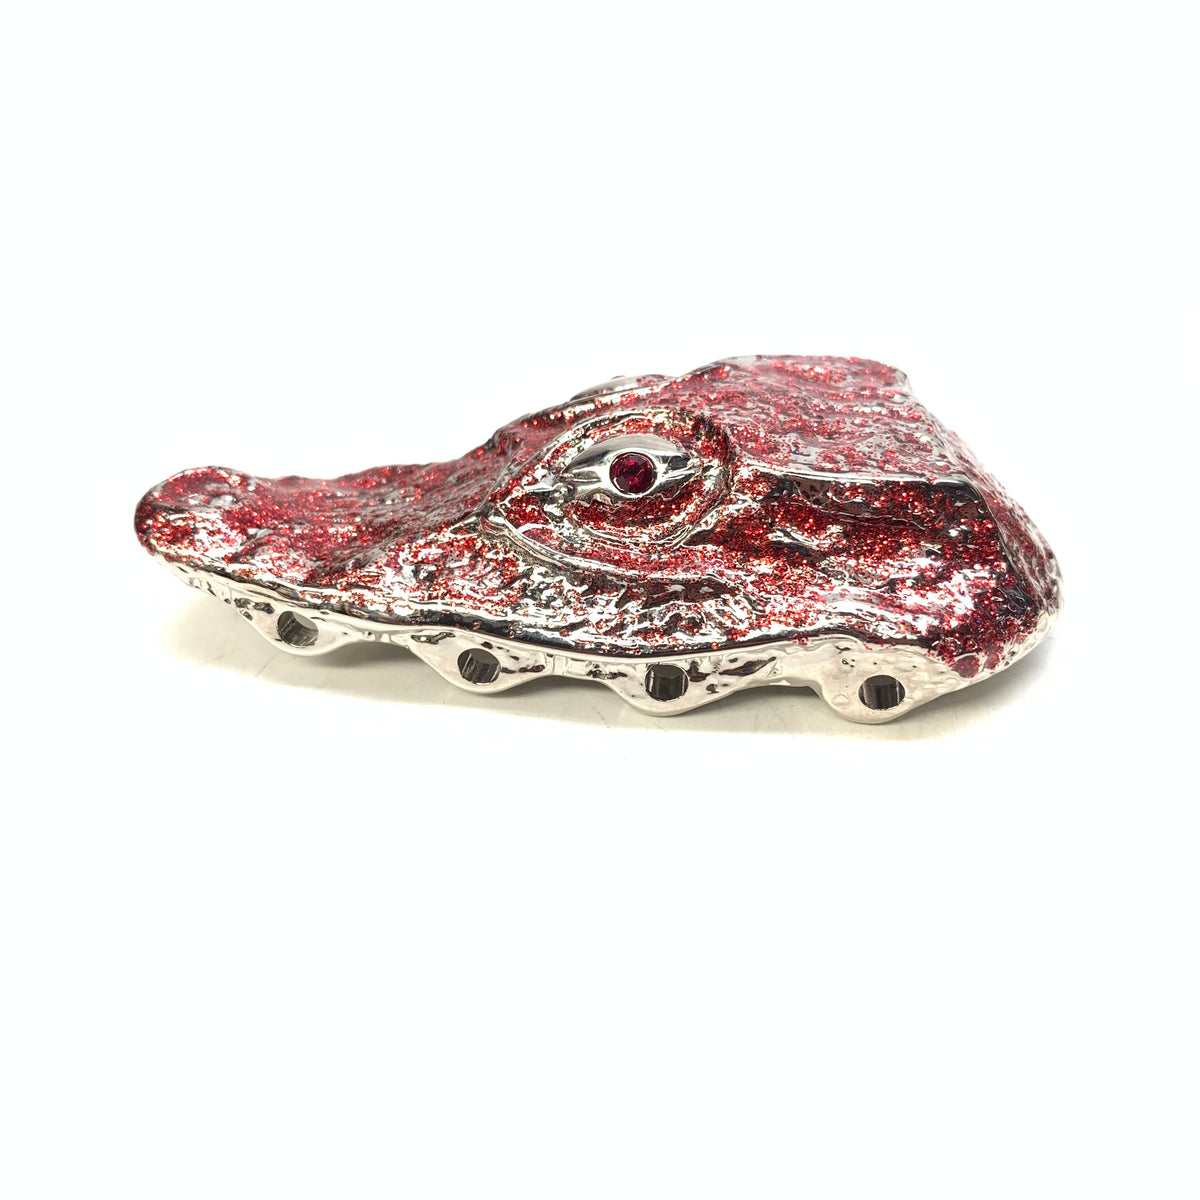 Mauri "Crystal Eye" Red Gator Head Lace Holders - Dudes Boutique